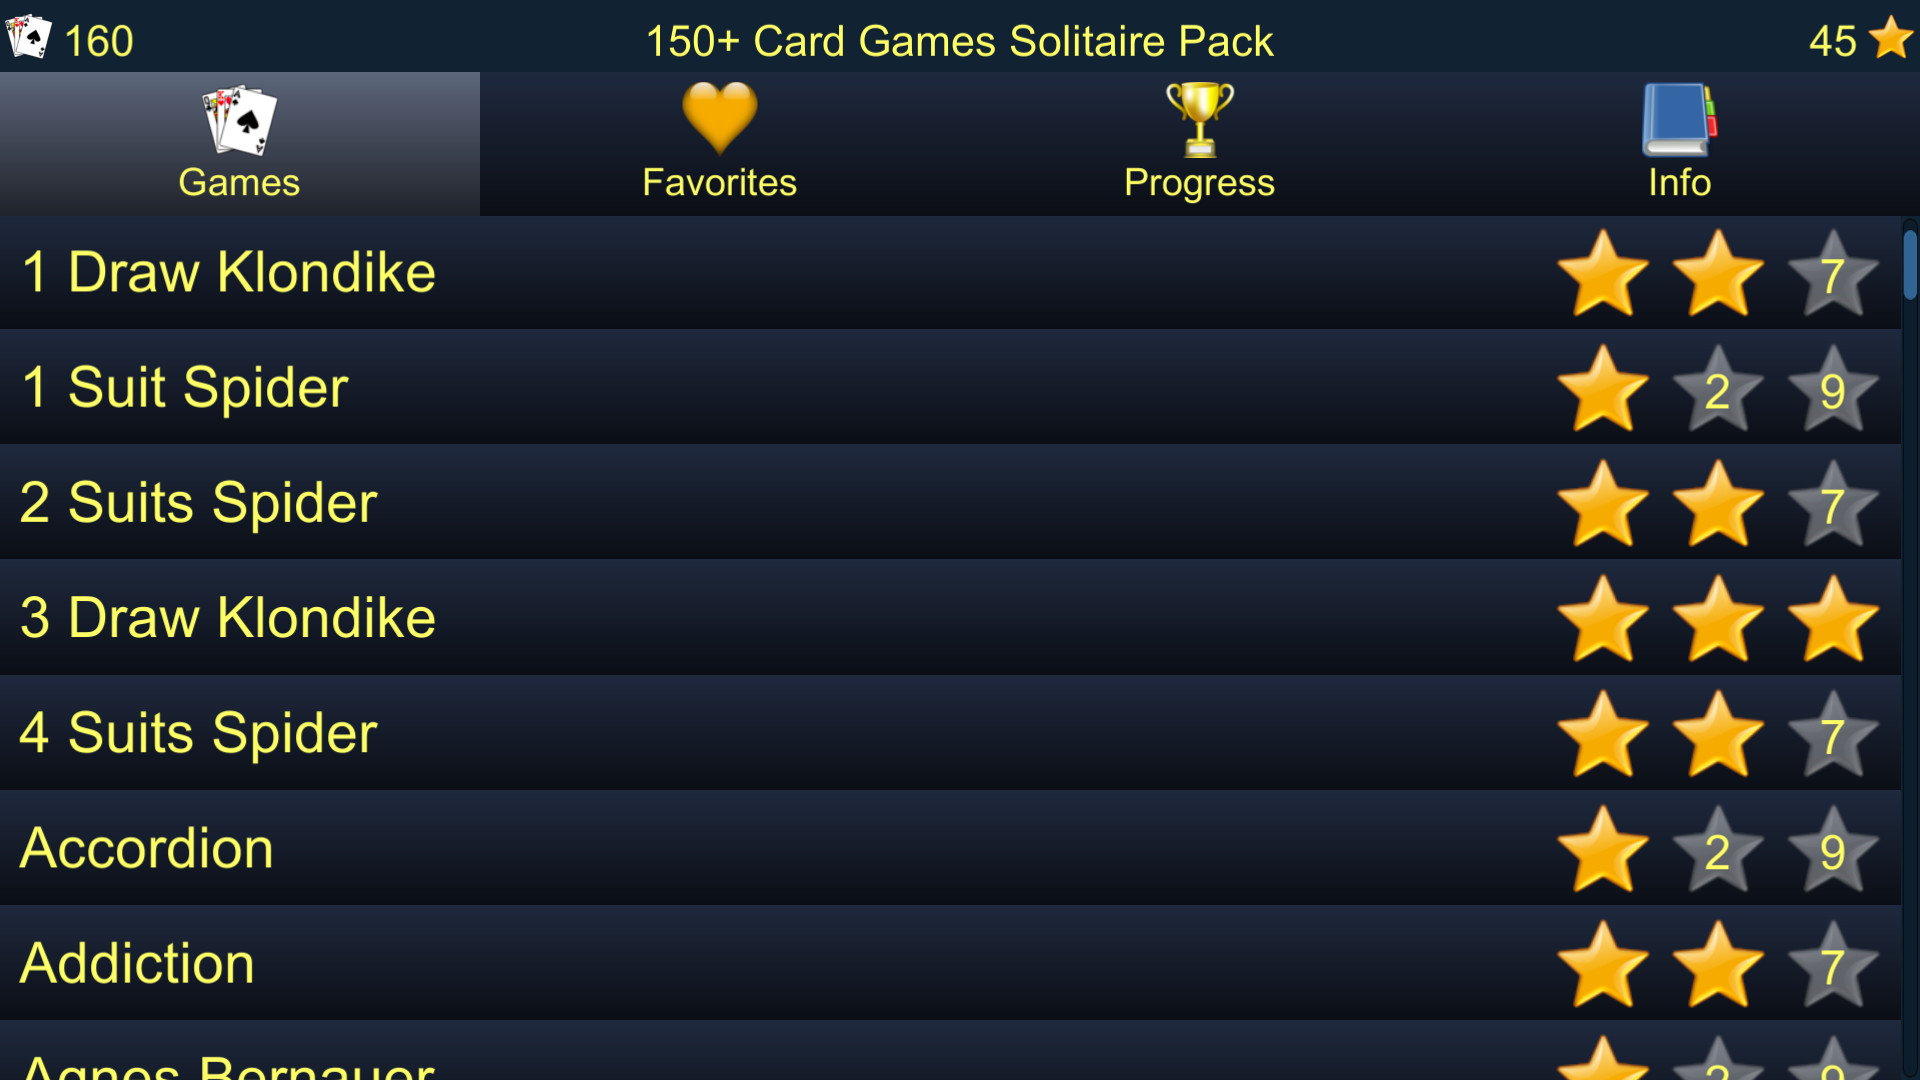 150+ Card Games Solitaire Pack Steam CD Key, 0.63 usd